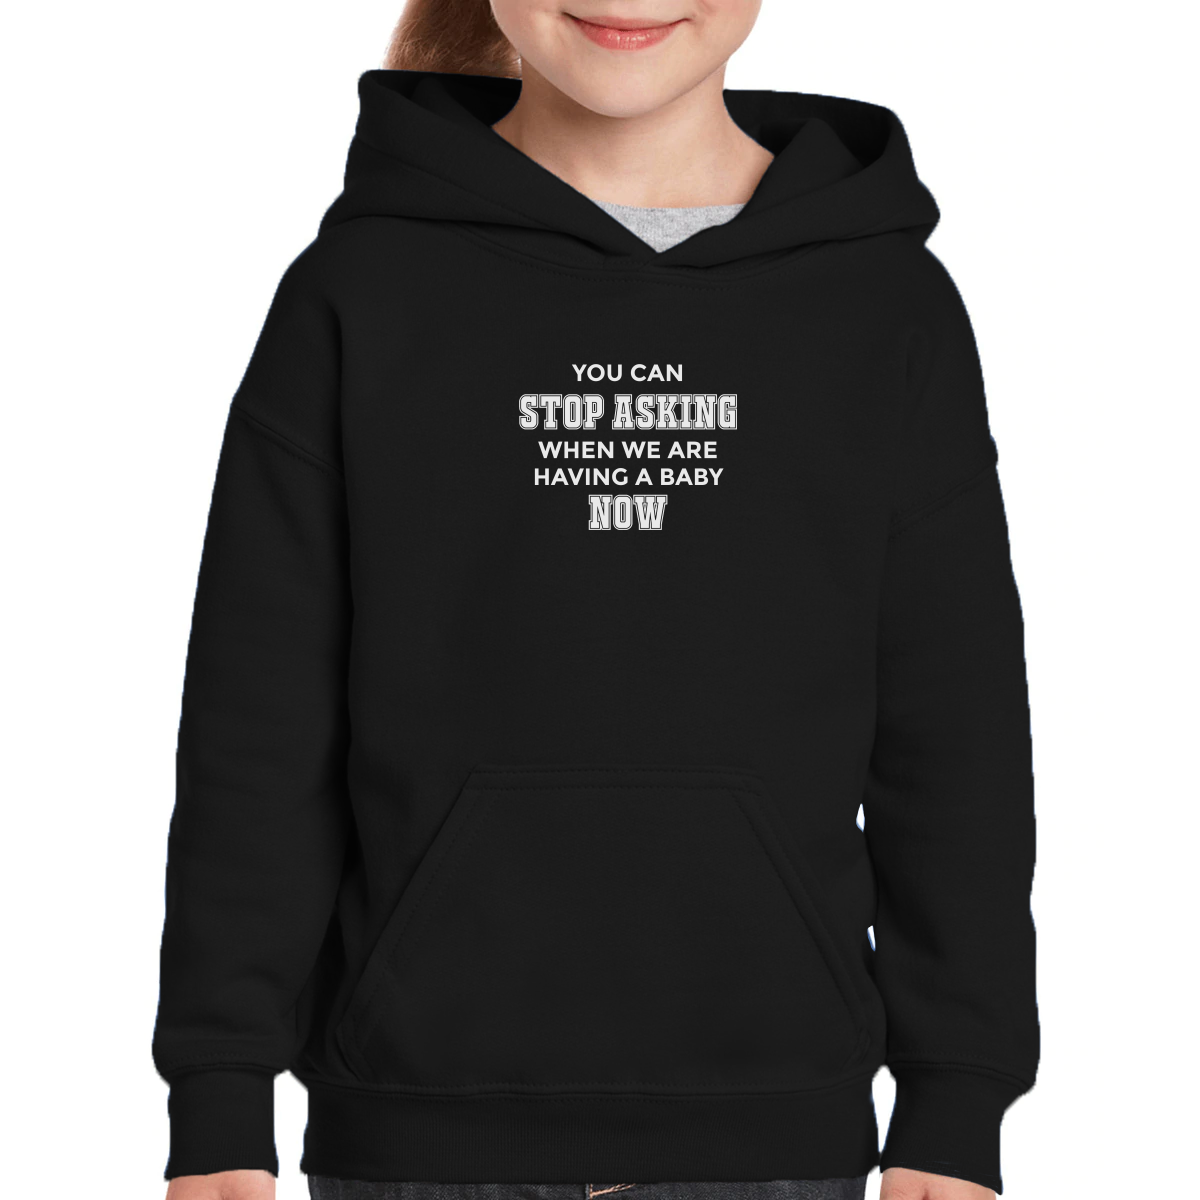 You can stop asking when we are having baby NOW Kids Hoodie | Black